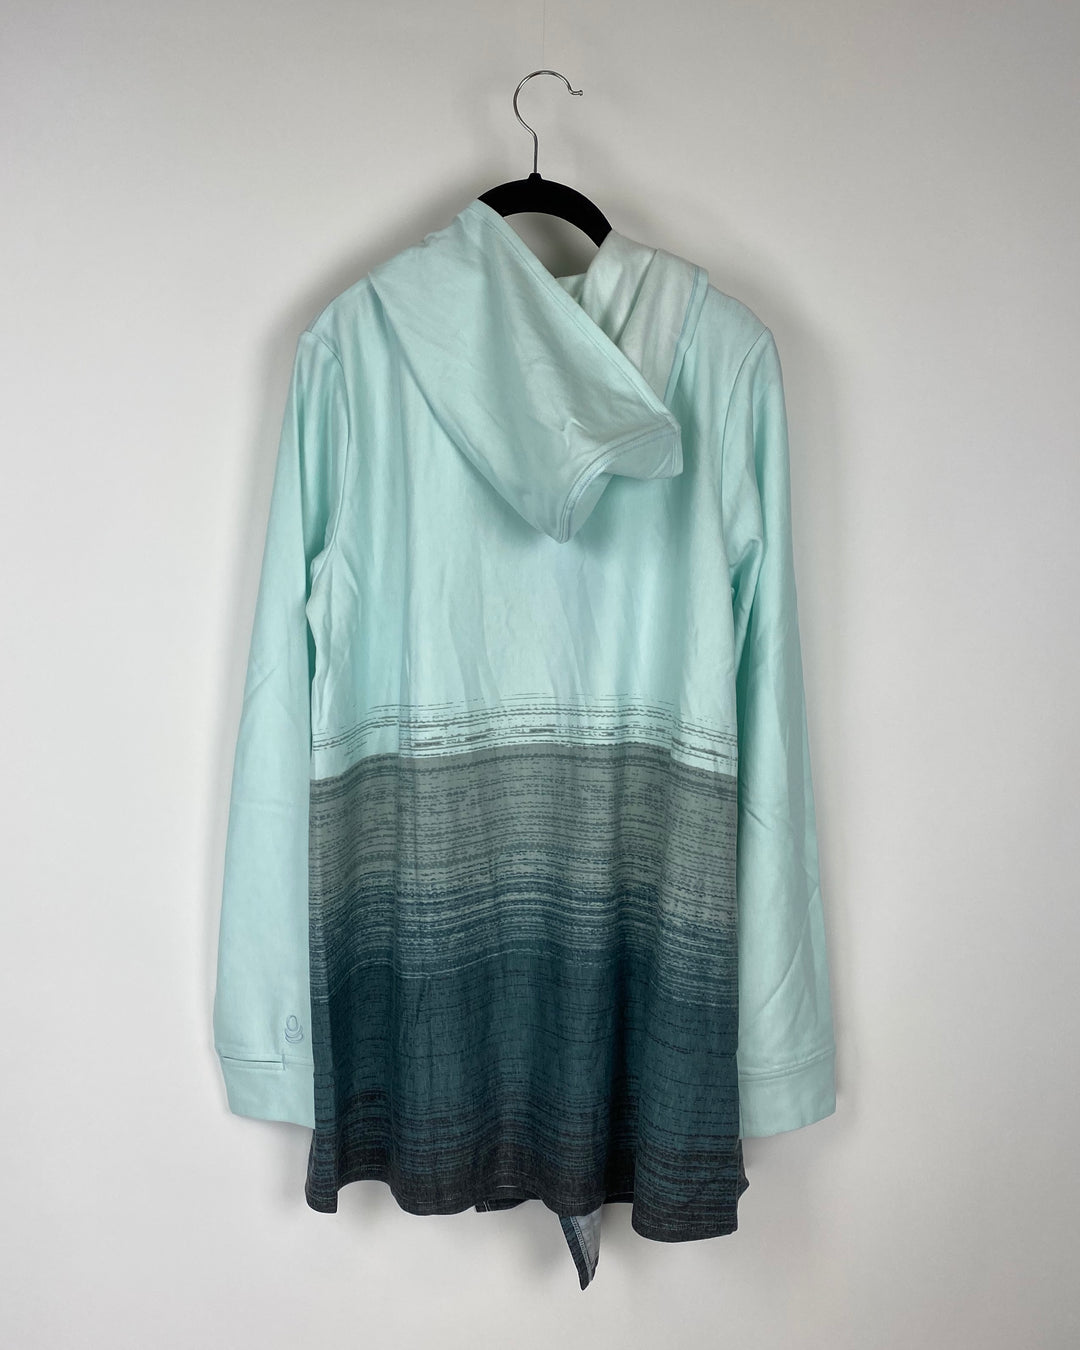 Teal Ombre Cardigan - Extra Small and Small